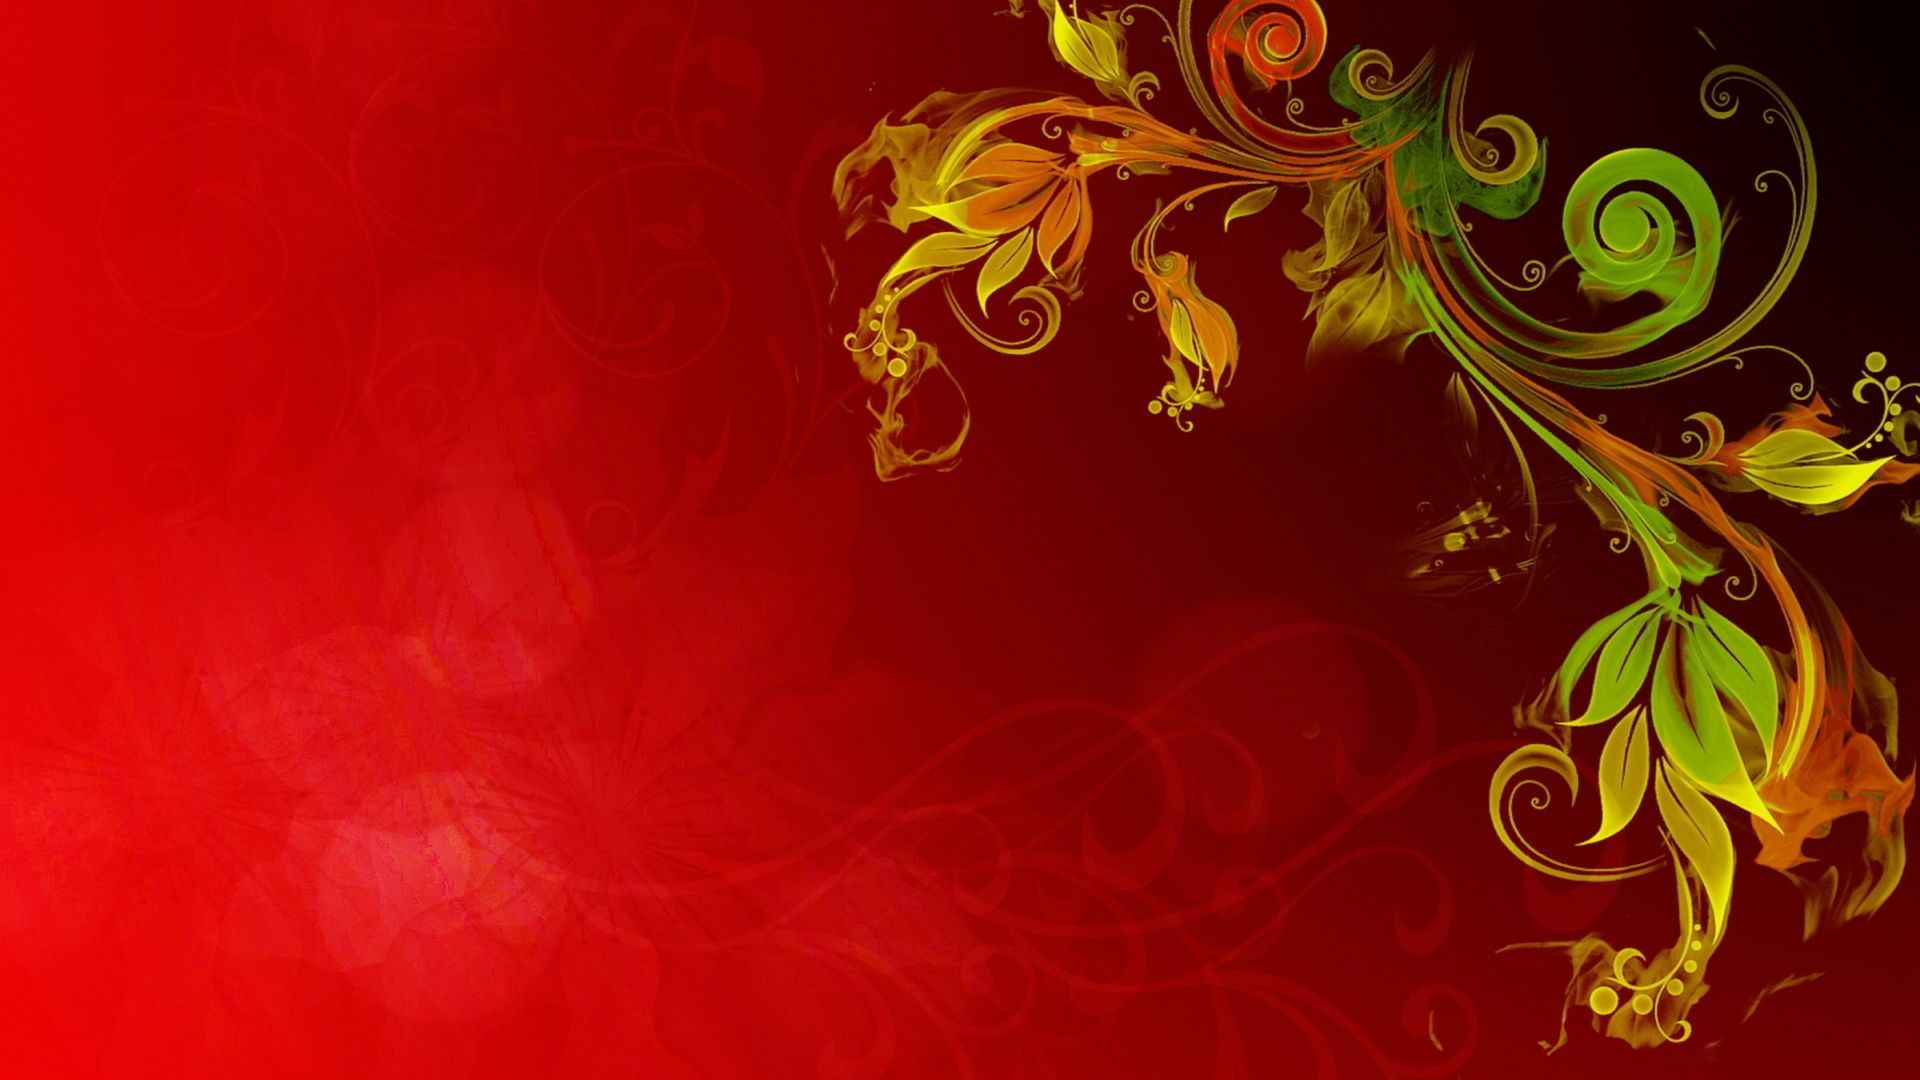 Gallery for - flower abstract wallpaper